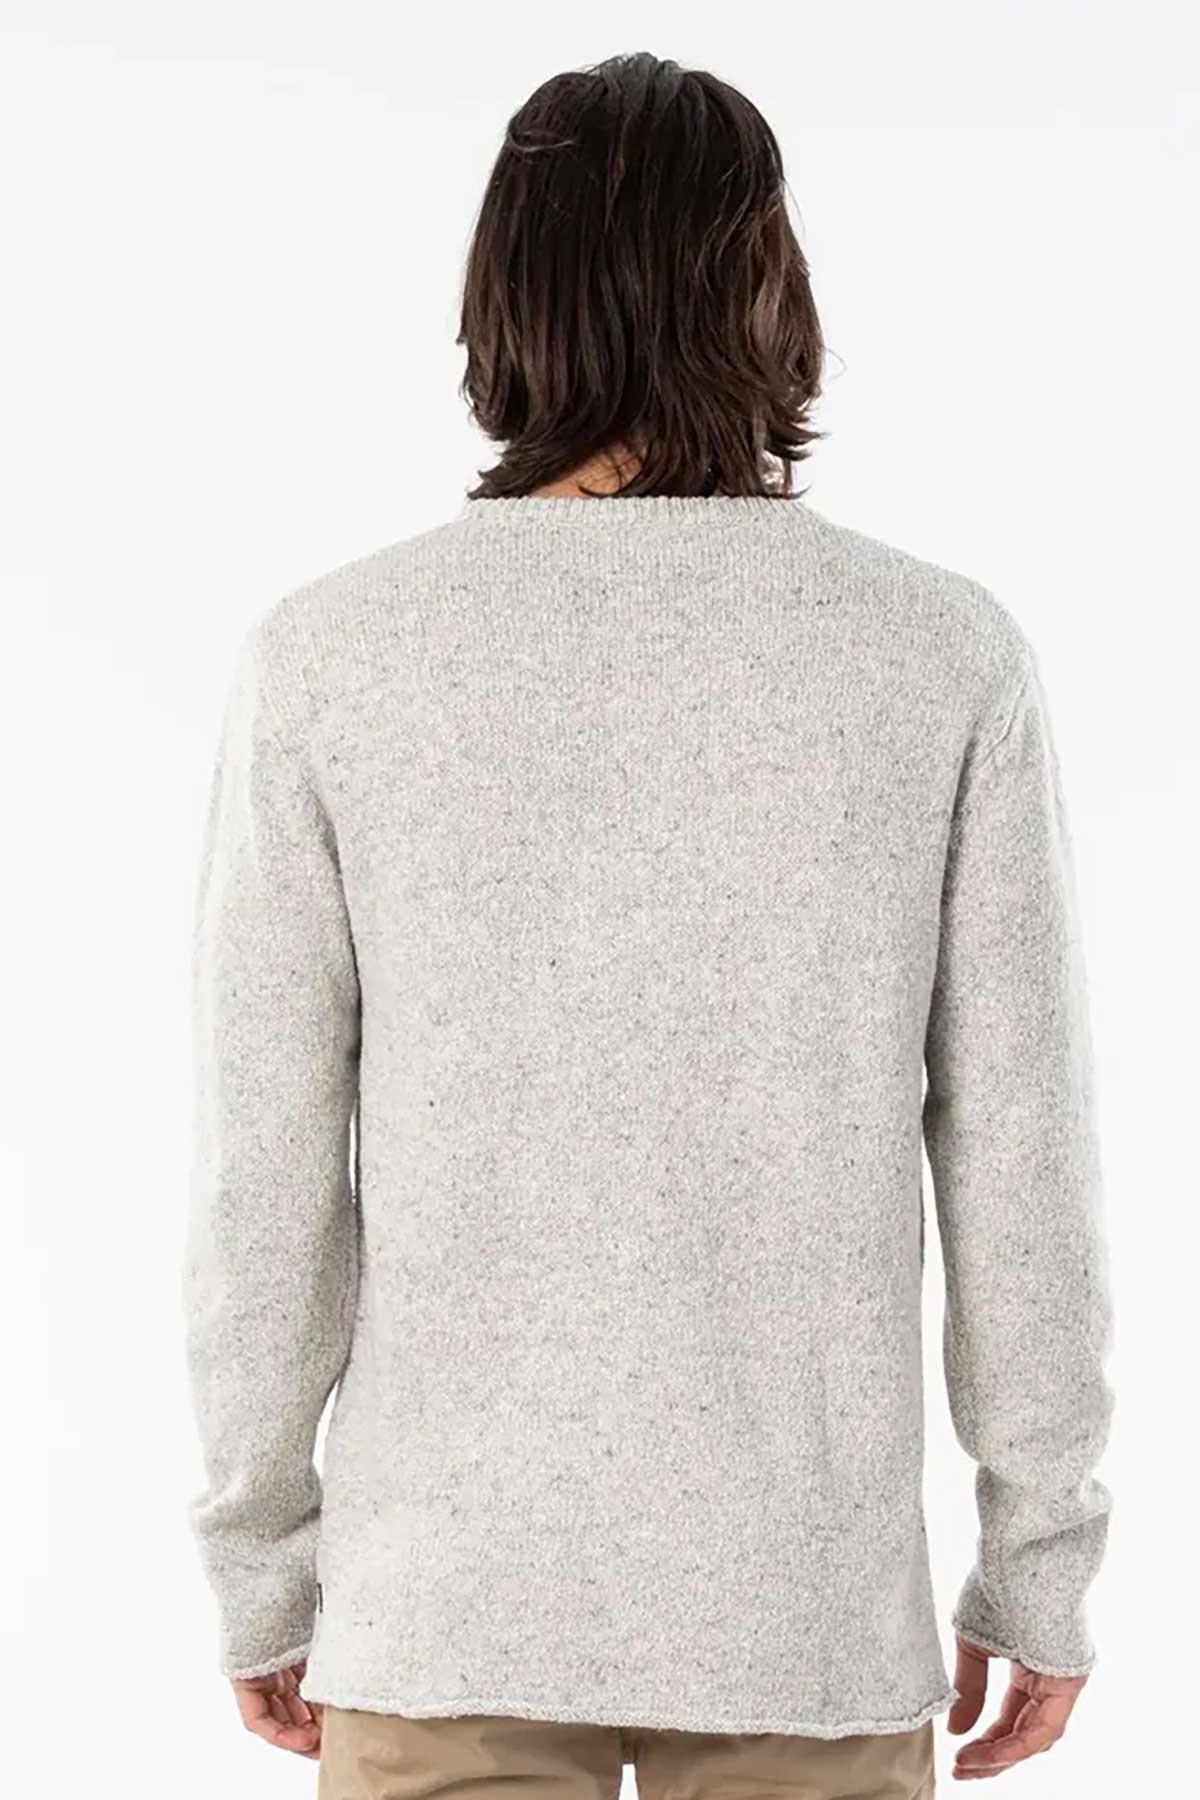 Rip Curl Knit Sweater - Neps Crew, rolled hem.